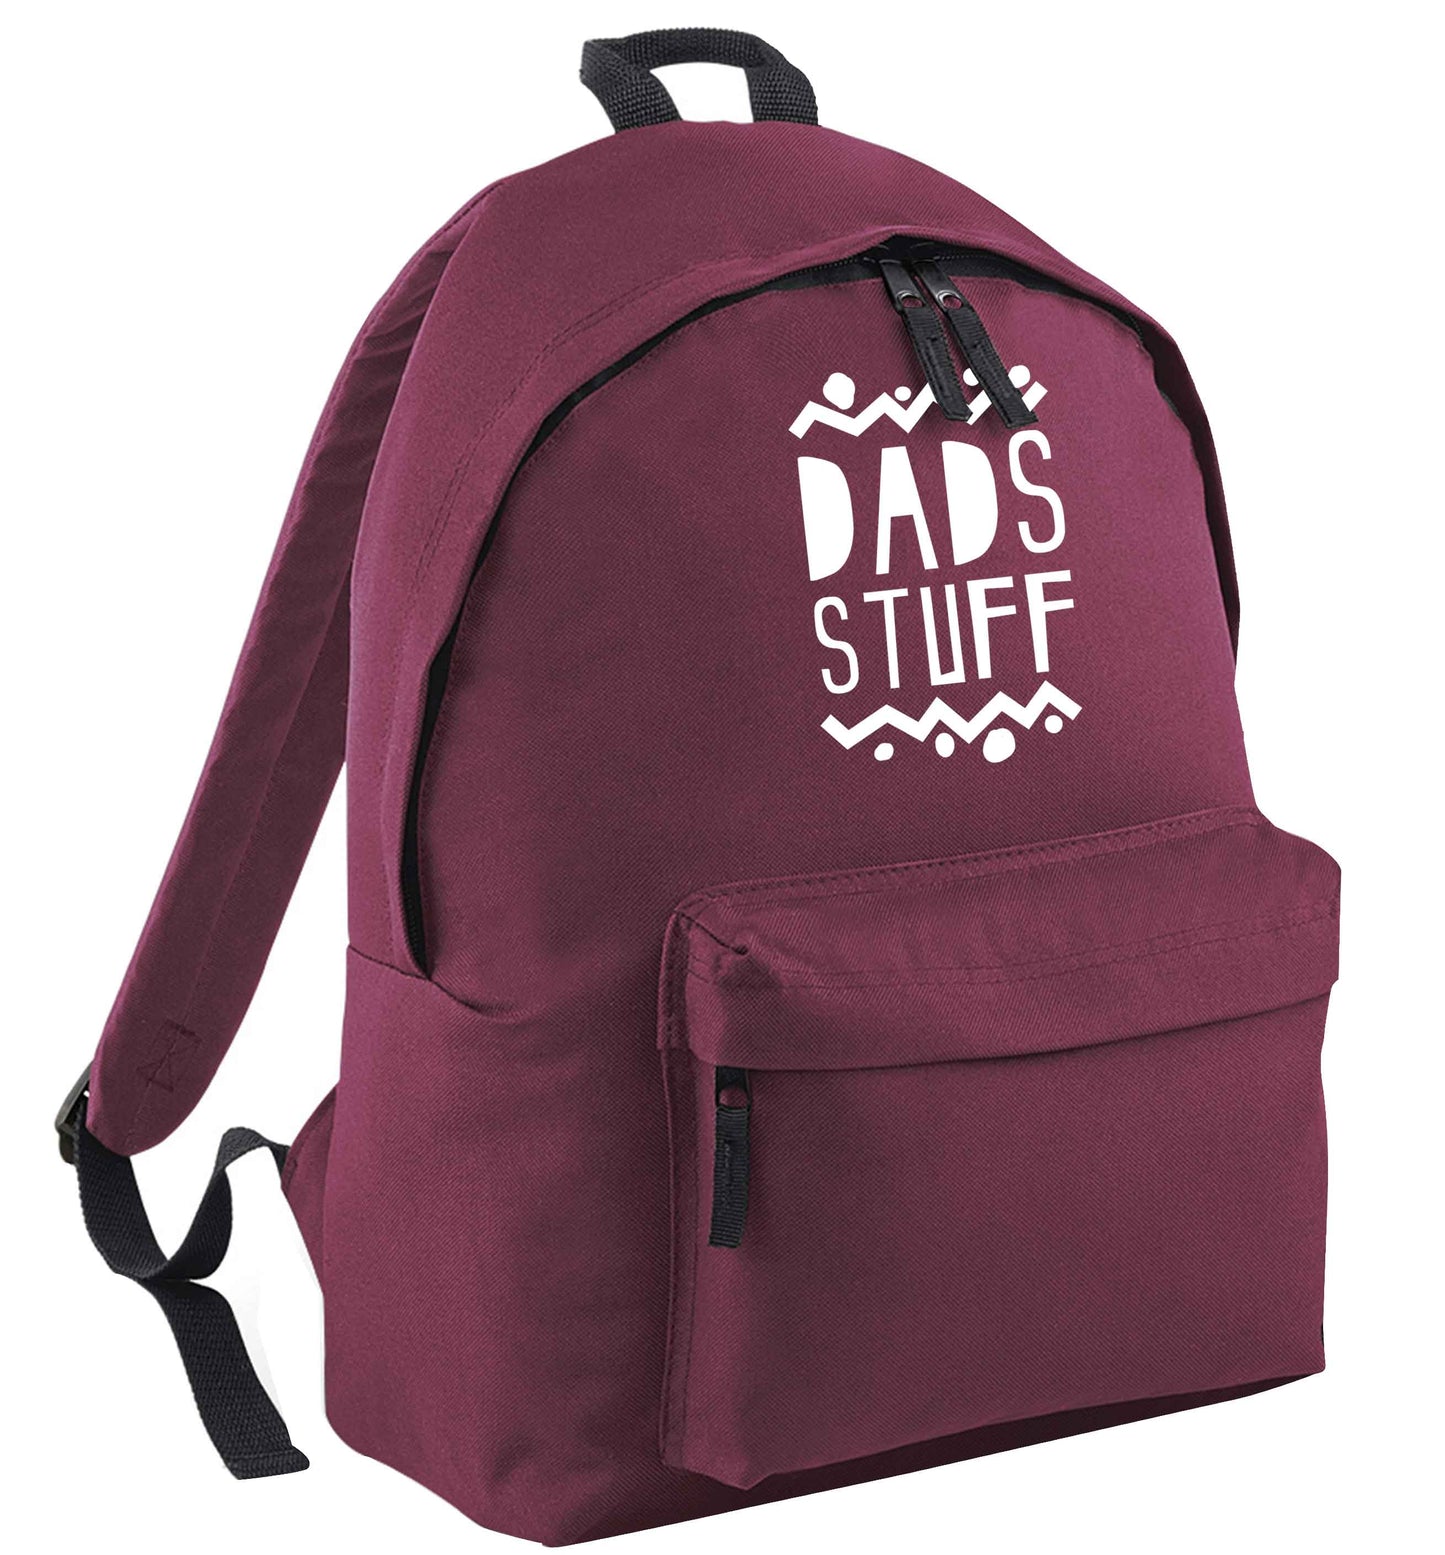 Dads stuff maroon adults backpack